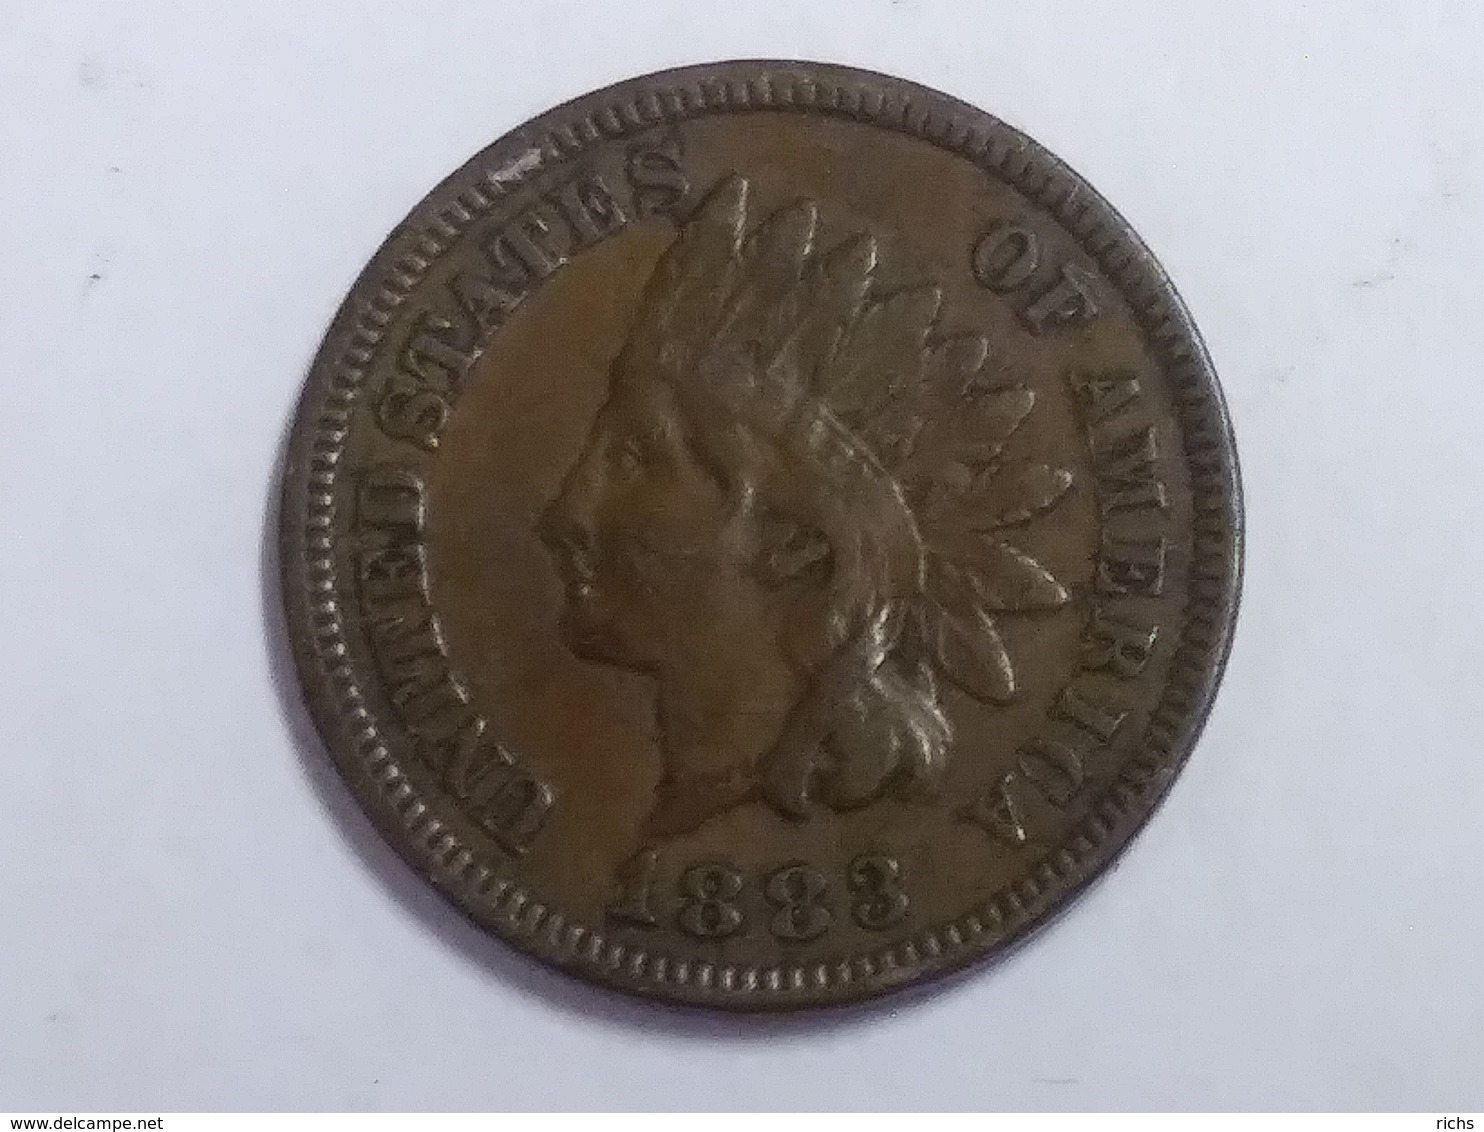 1883 Indian Head Cent - 1859-1909: Indian Head